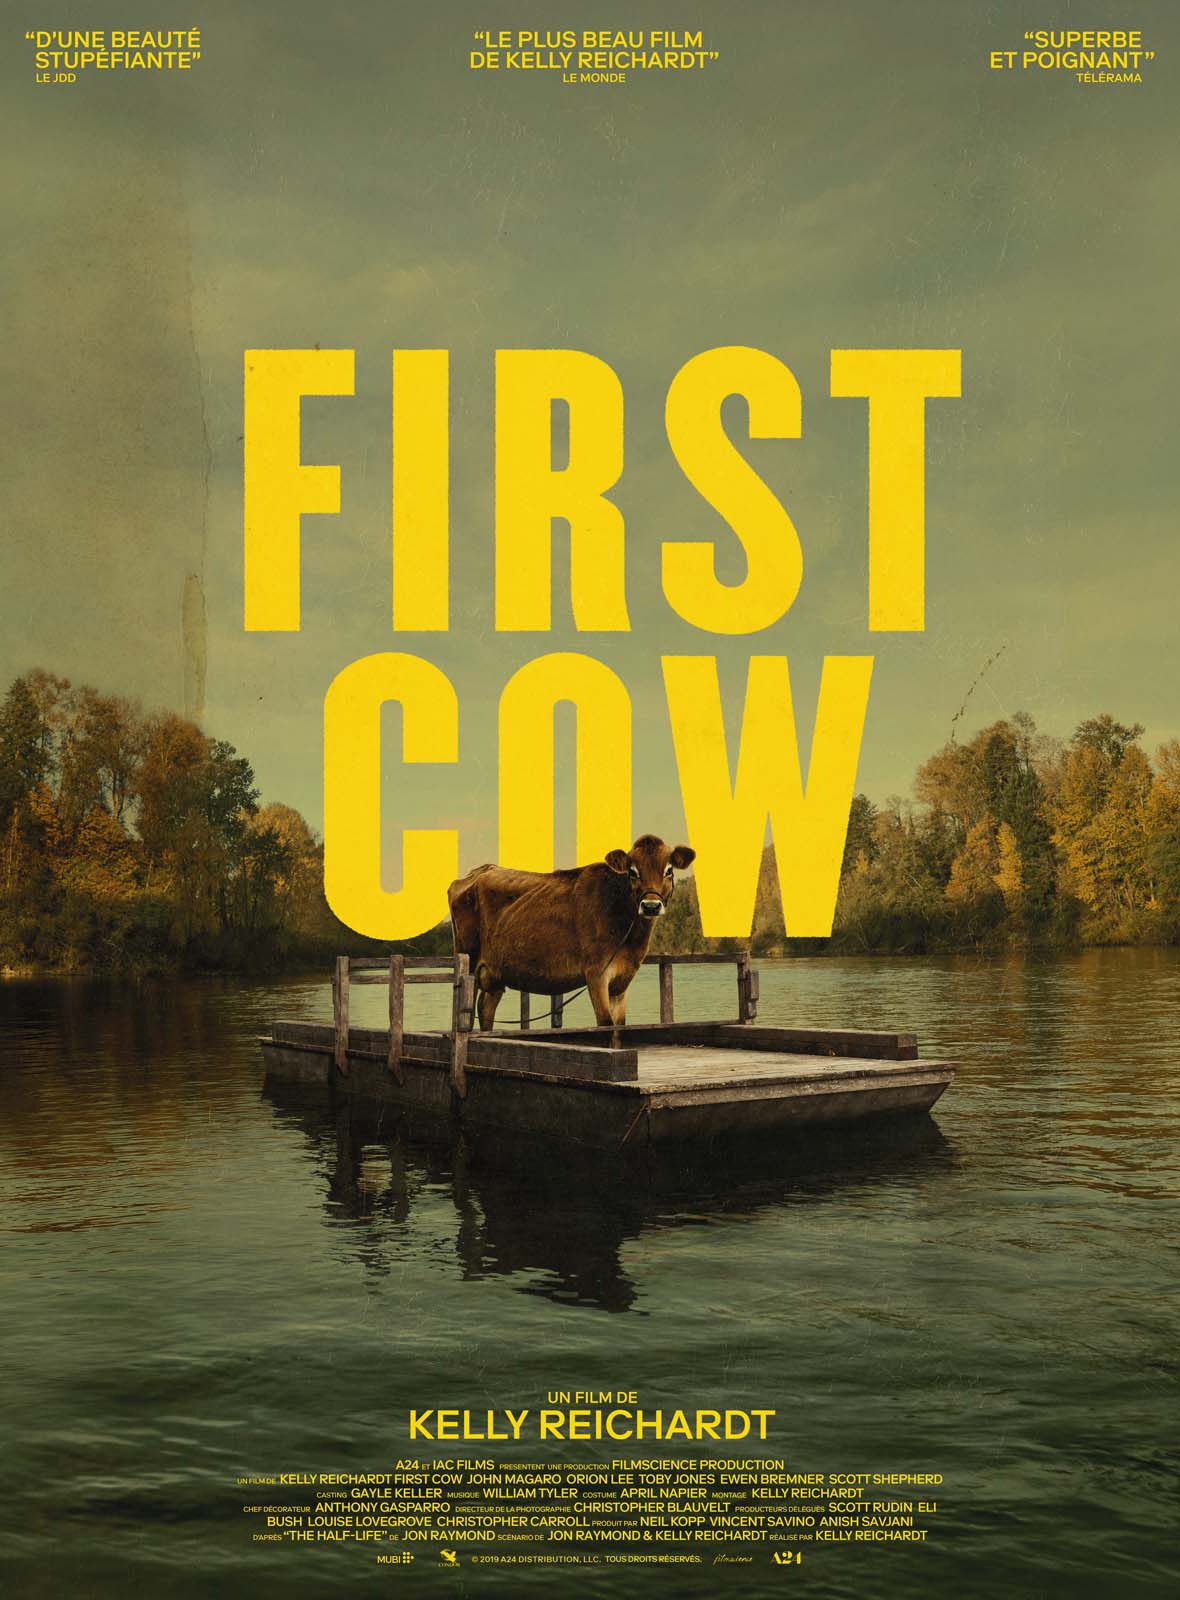 Voir Film First Cow - Film (2019) streaming VF gratuit complet